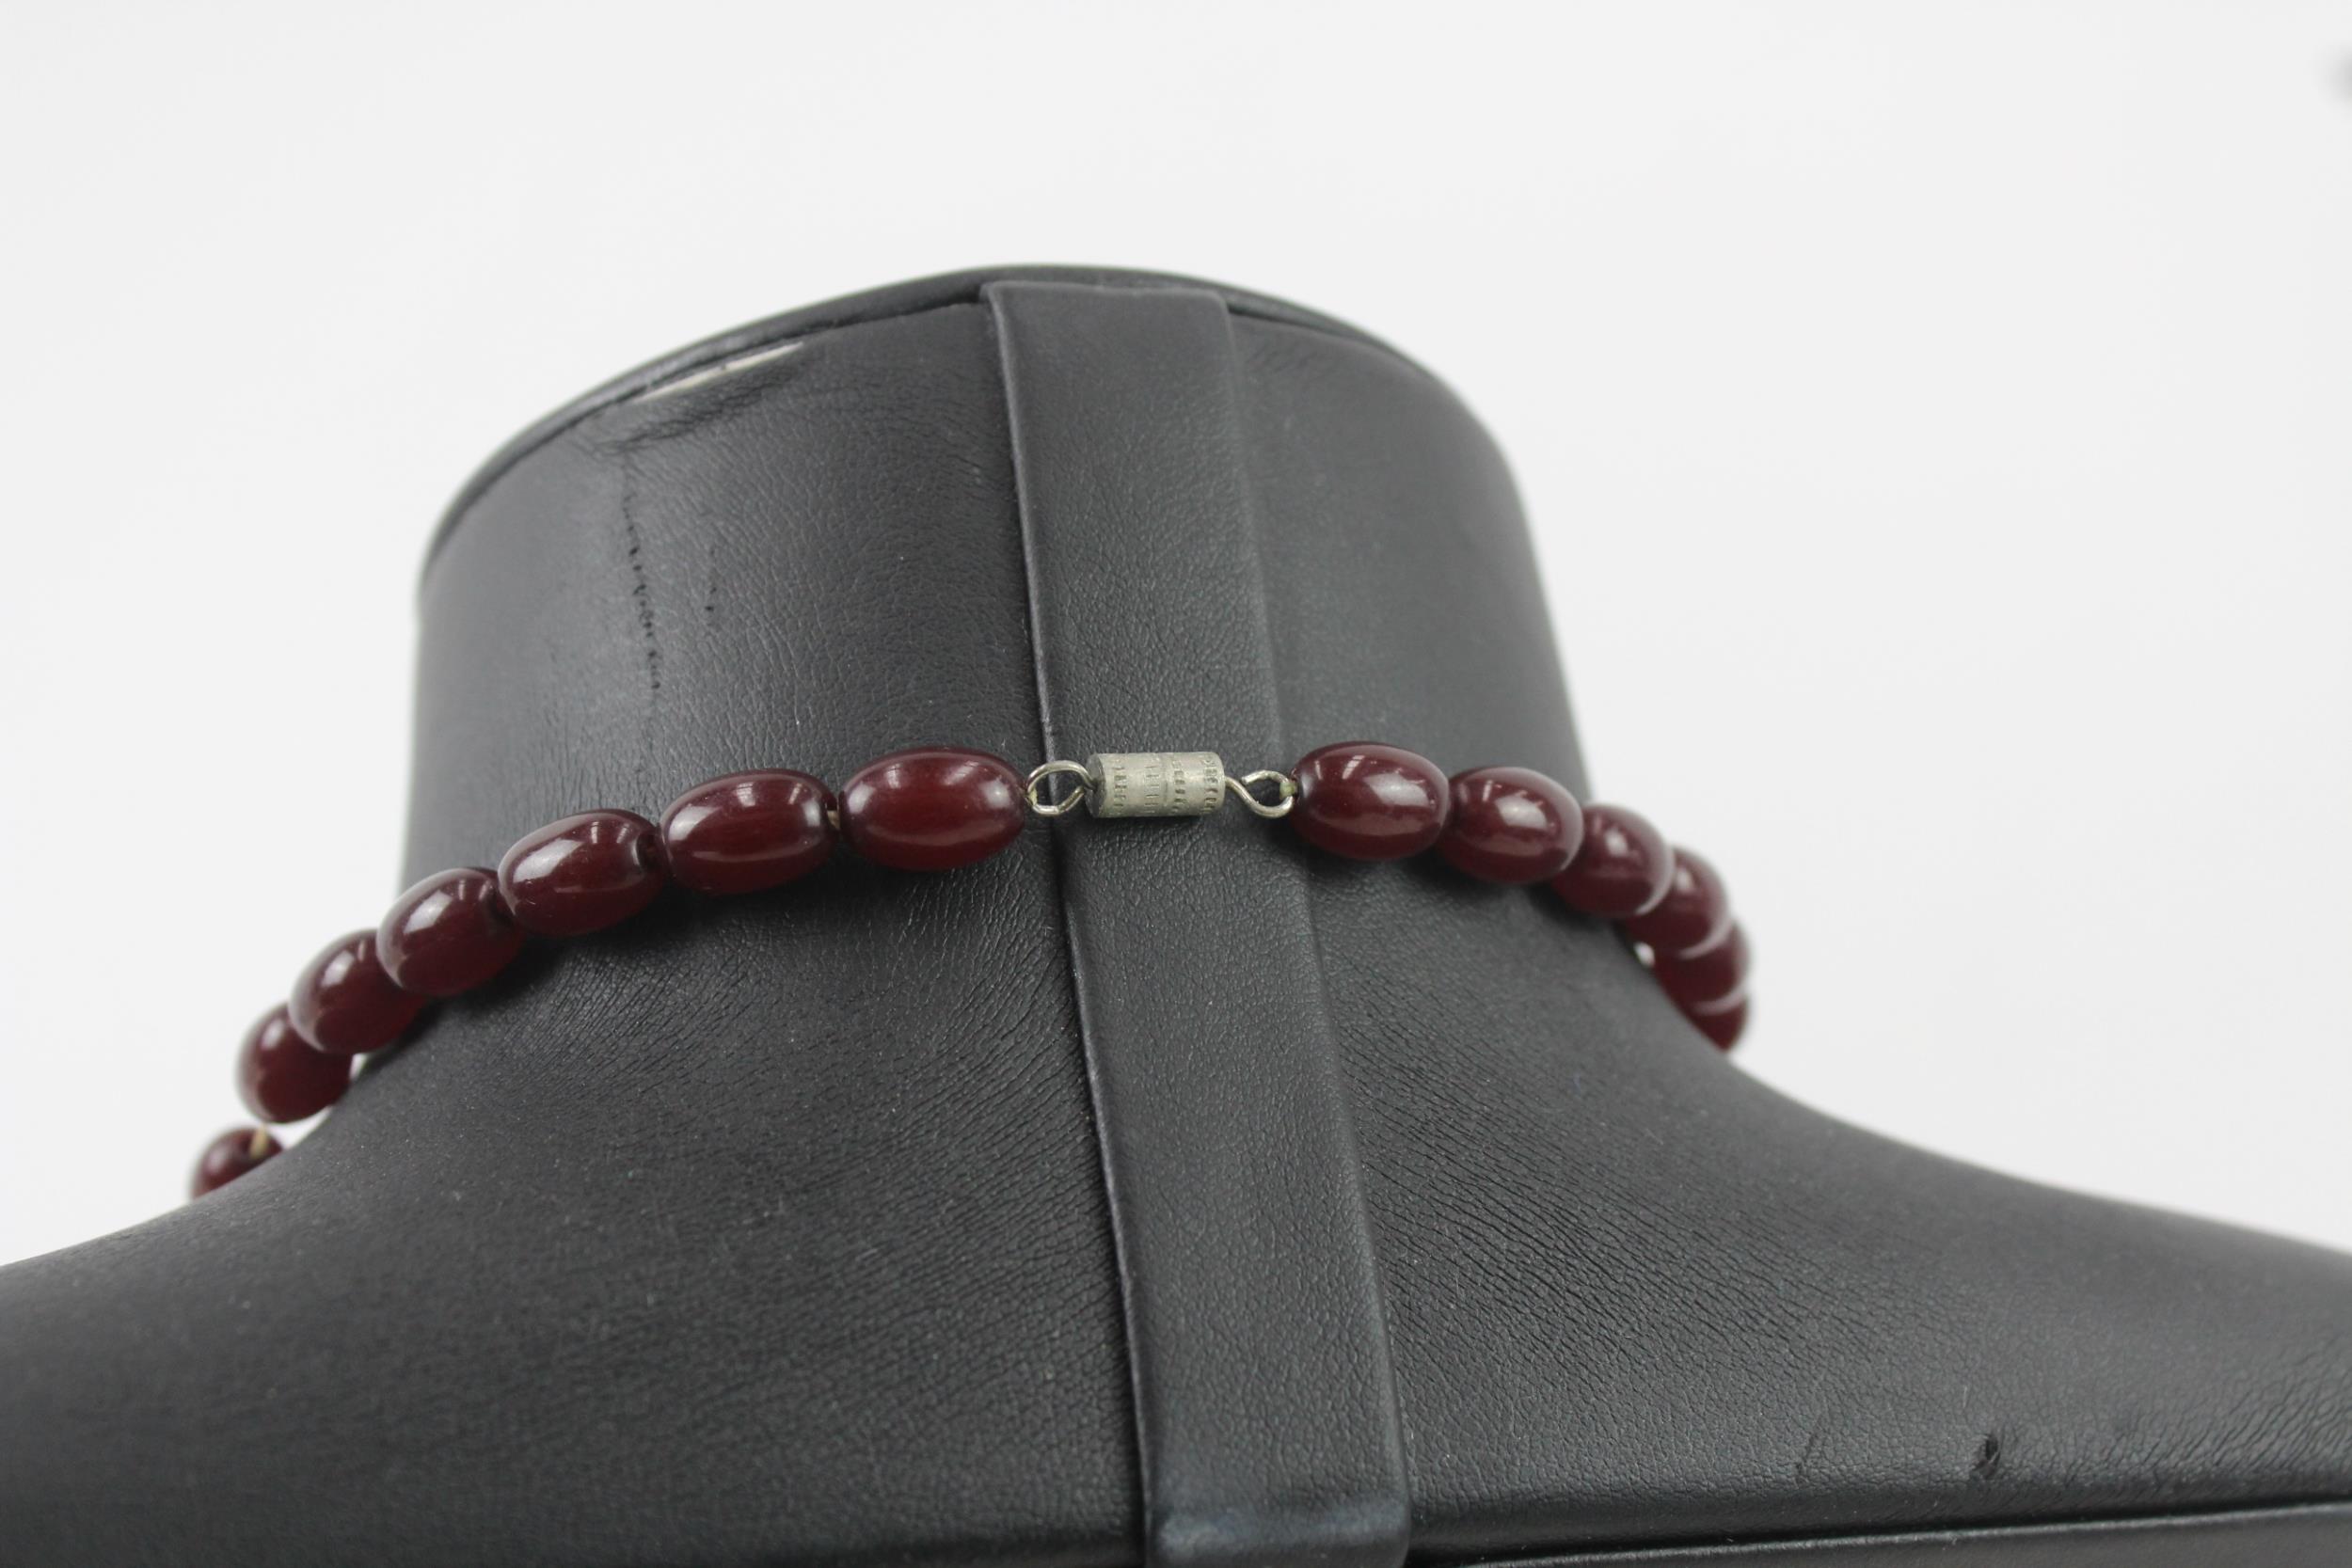 Cherry Bakelite graduated necklace with screw clasp (66g) - Image 7 of 7